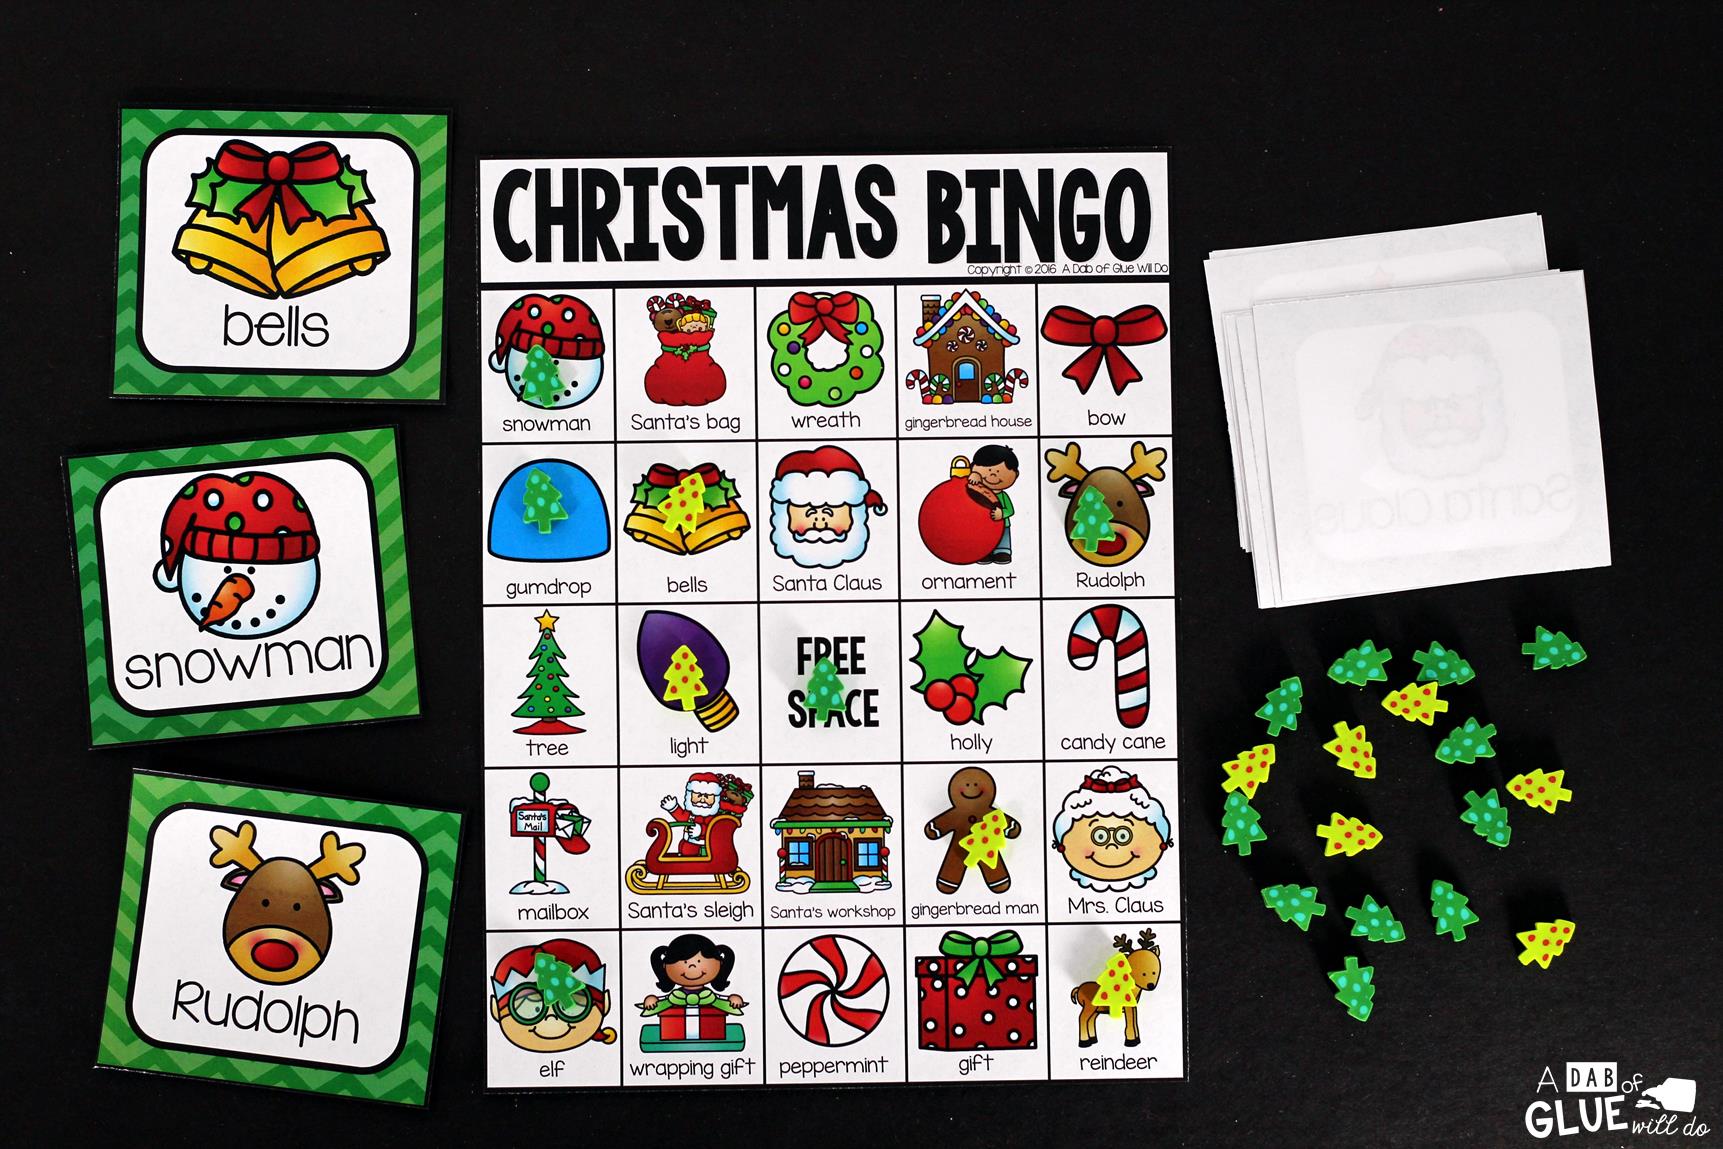 Play Christmas Bingo with your elementary age students for a fun Christmas themed game! Perfect for large groups in your classroom or small review groups. Add this to your Christmas or Holiday party with 30 unique Christmas Bingo boards with your students! Teaching cards are also included in this fun game for young children! Black and white options available to save your color ink.